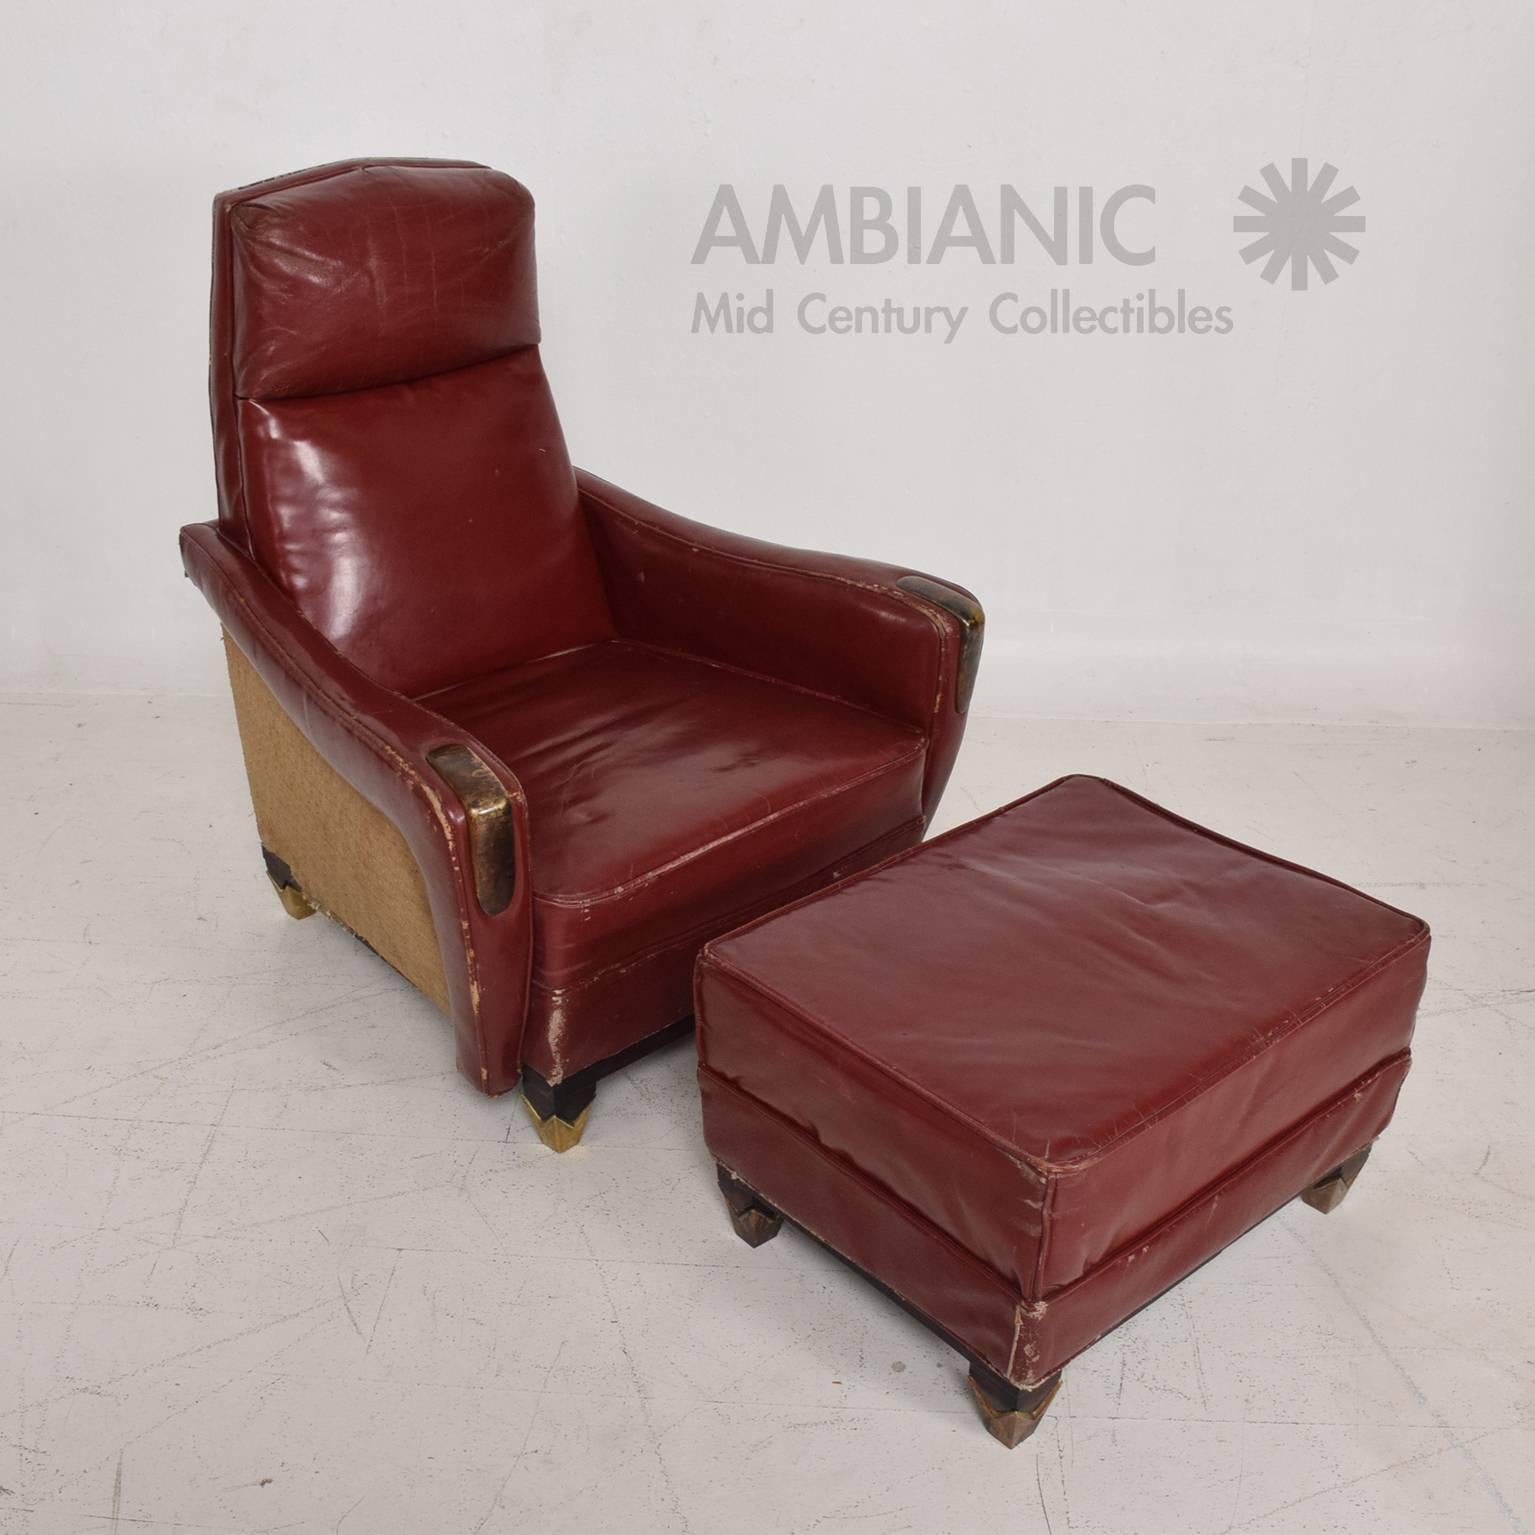 For your consideration, a tall back Mexican Modernist club chair and ottoman red leather and brass. Attributed to Arturo Pani, Mexico, circa 1950s. Original vintage condition. Leather has sings of vintage wear. Brass has patina. Wood has patina and